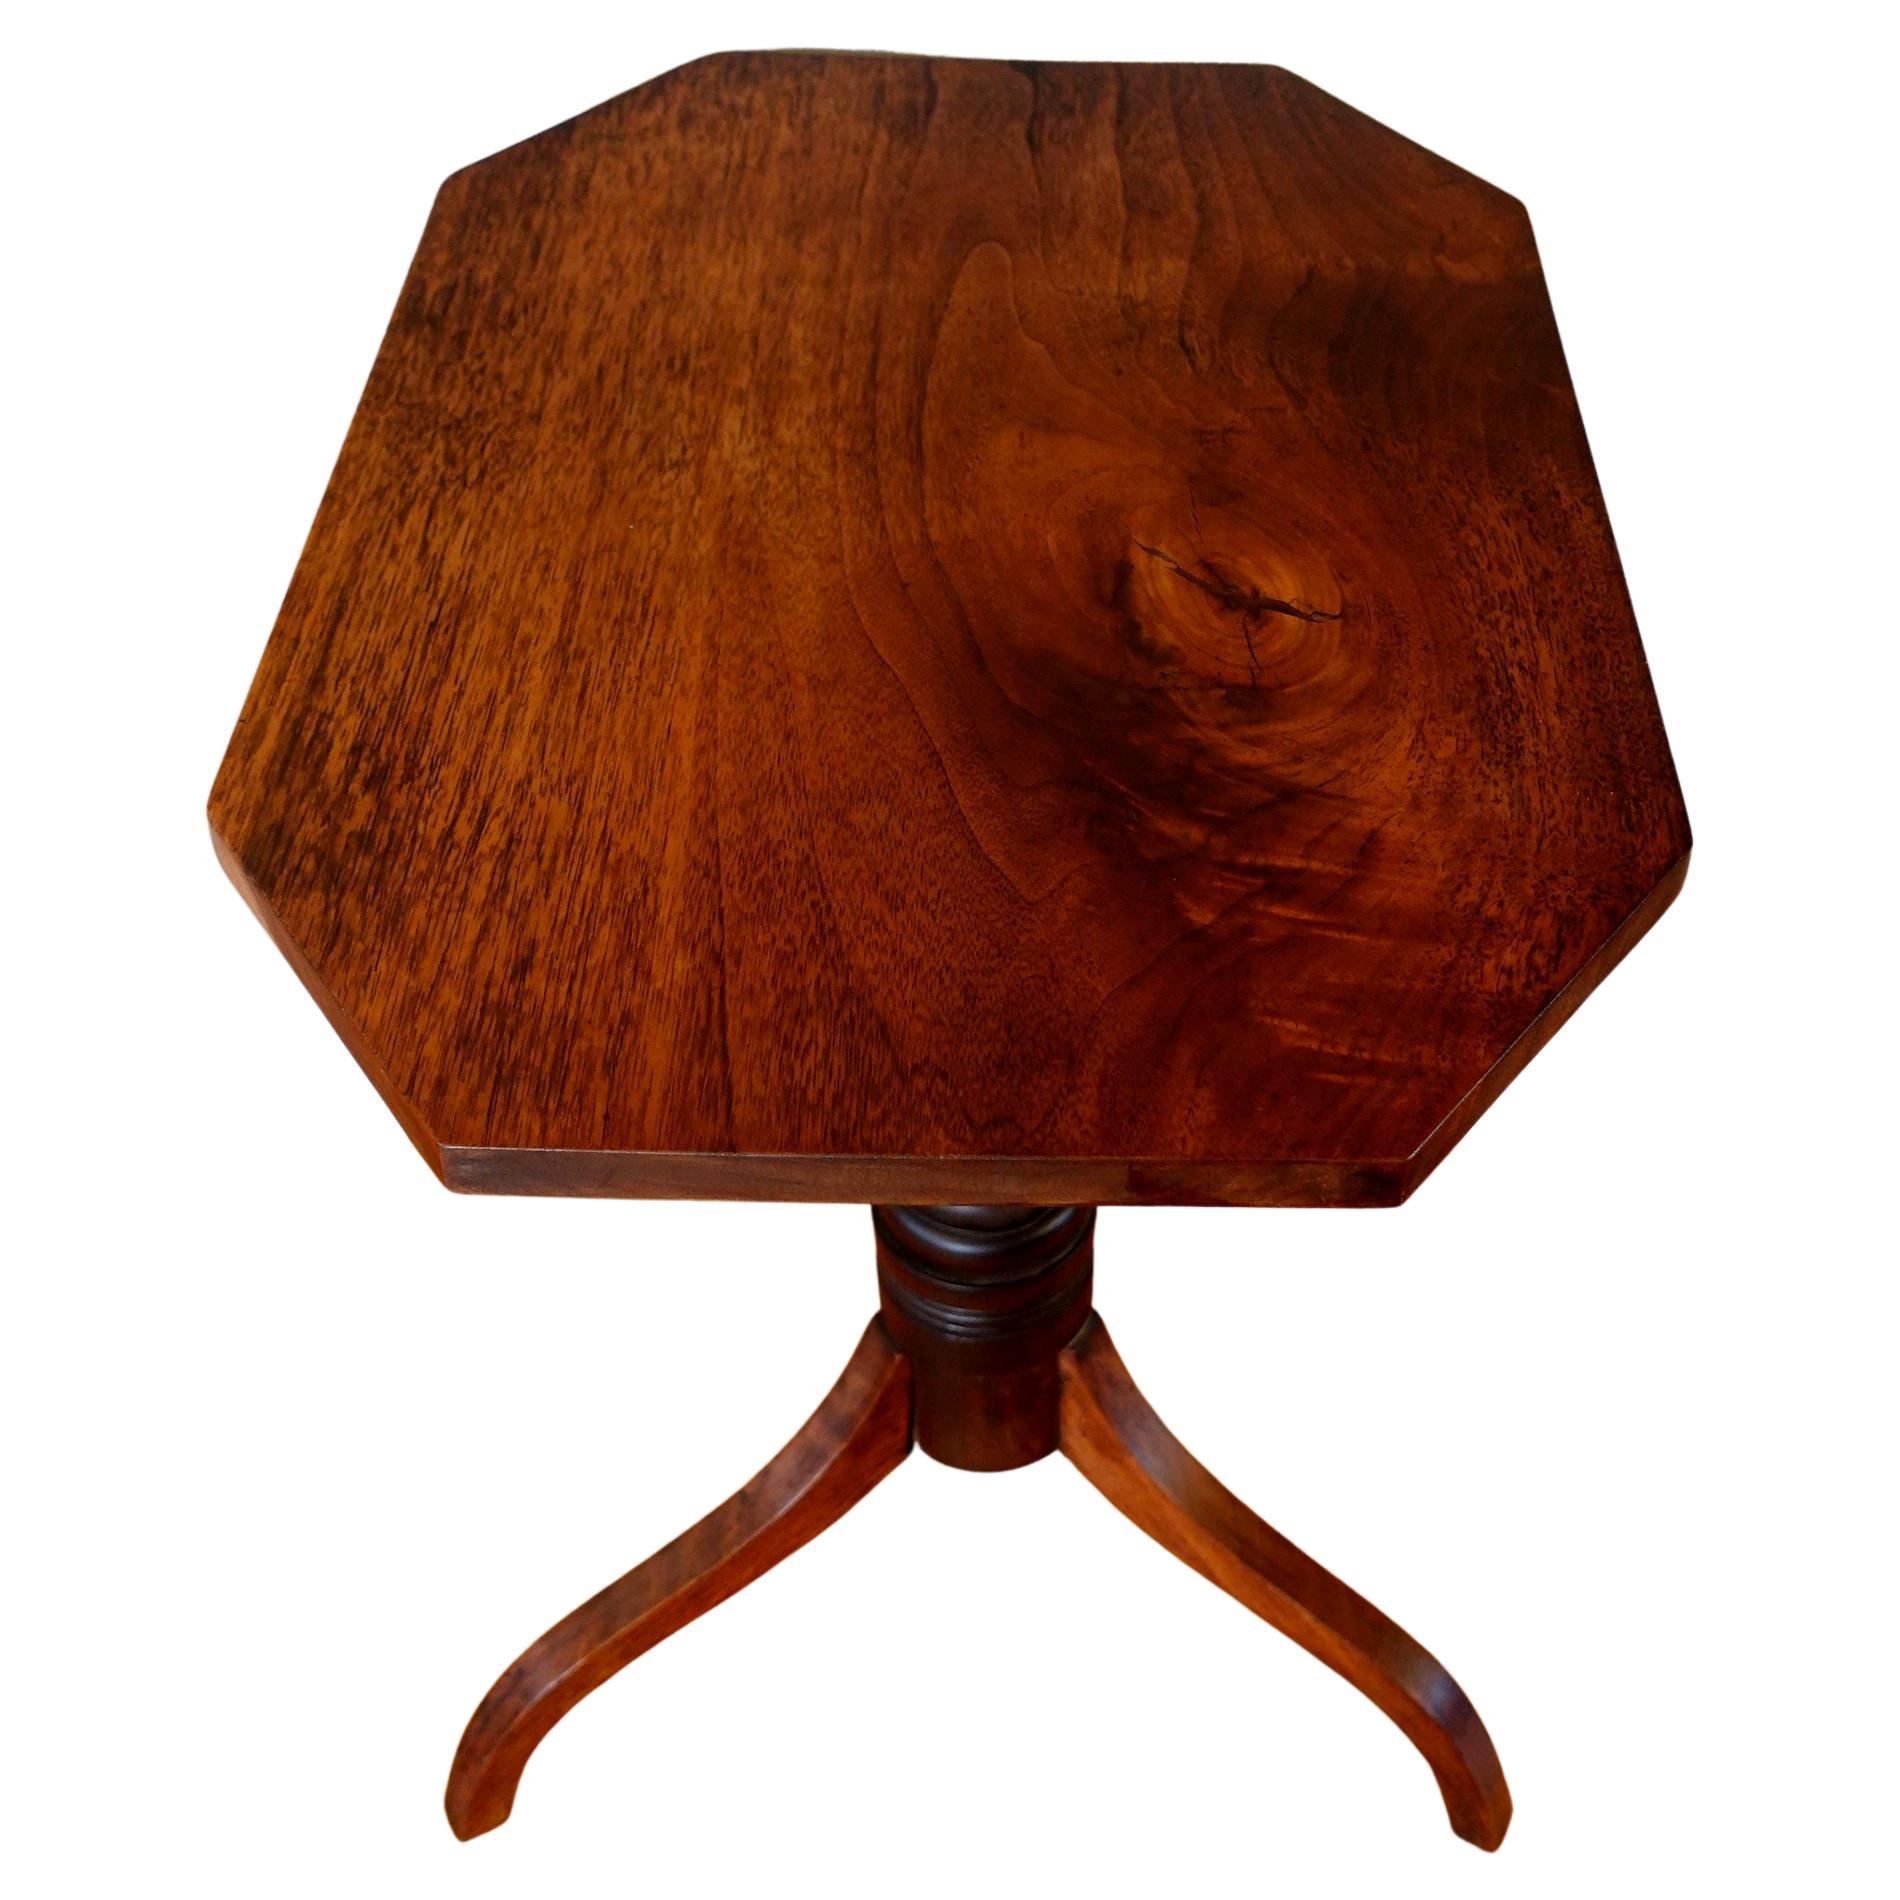 19th Century Federal Style Walnut Tilt Top Candle Stand For Sale